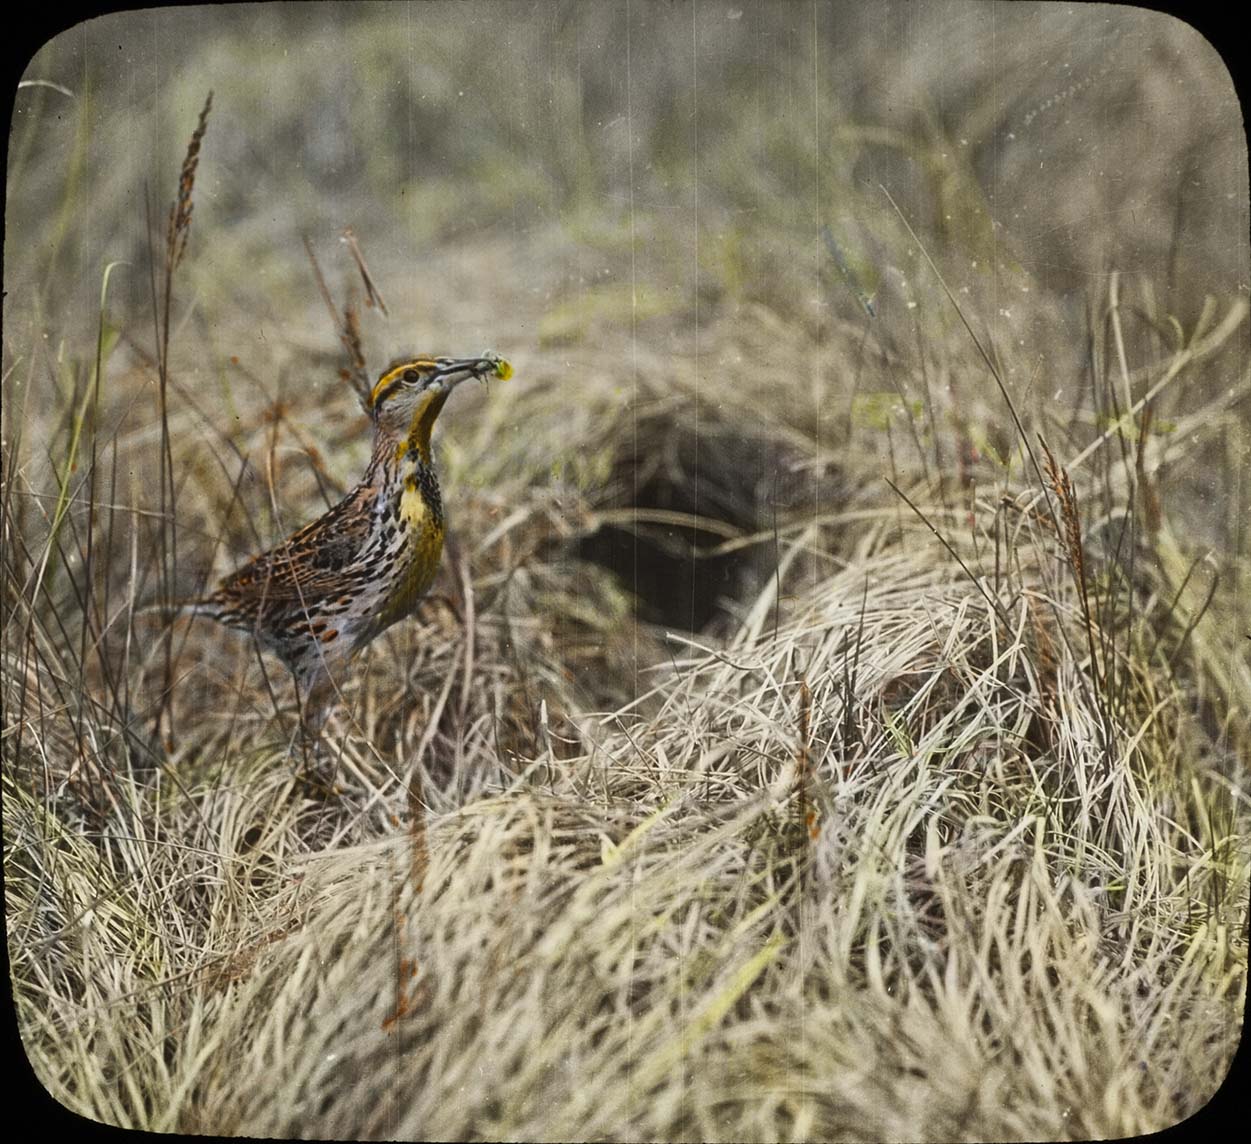 Lantern slide and photograph of a Meadowlark approaching a nest with food